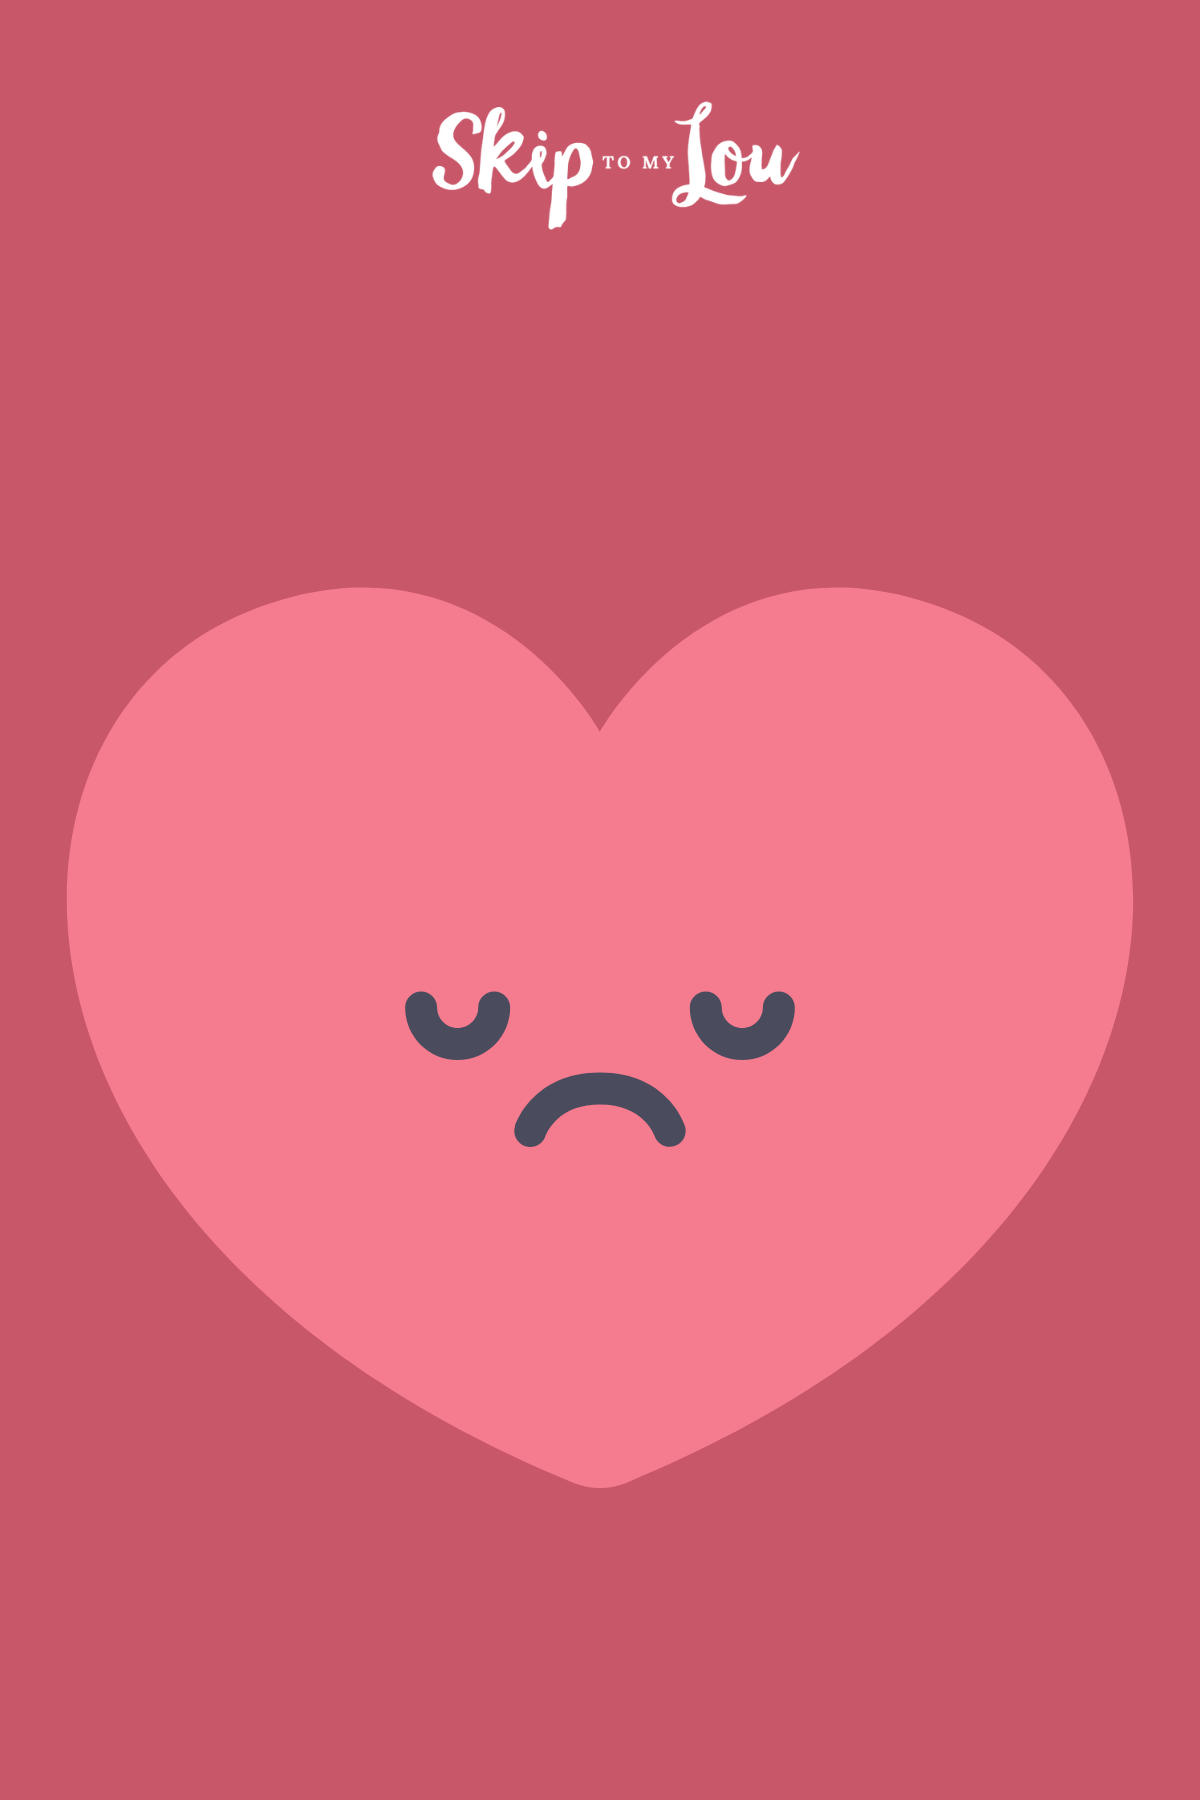 Image shows an image of a simple heart with sad eyes, over a red background 